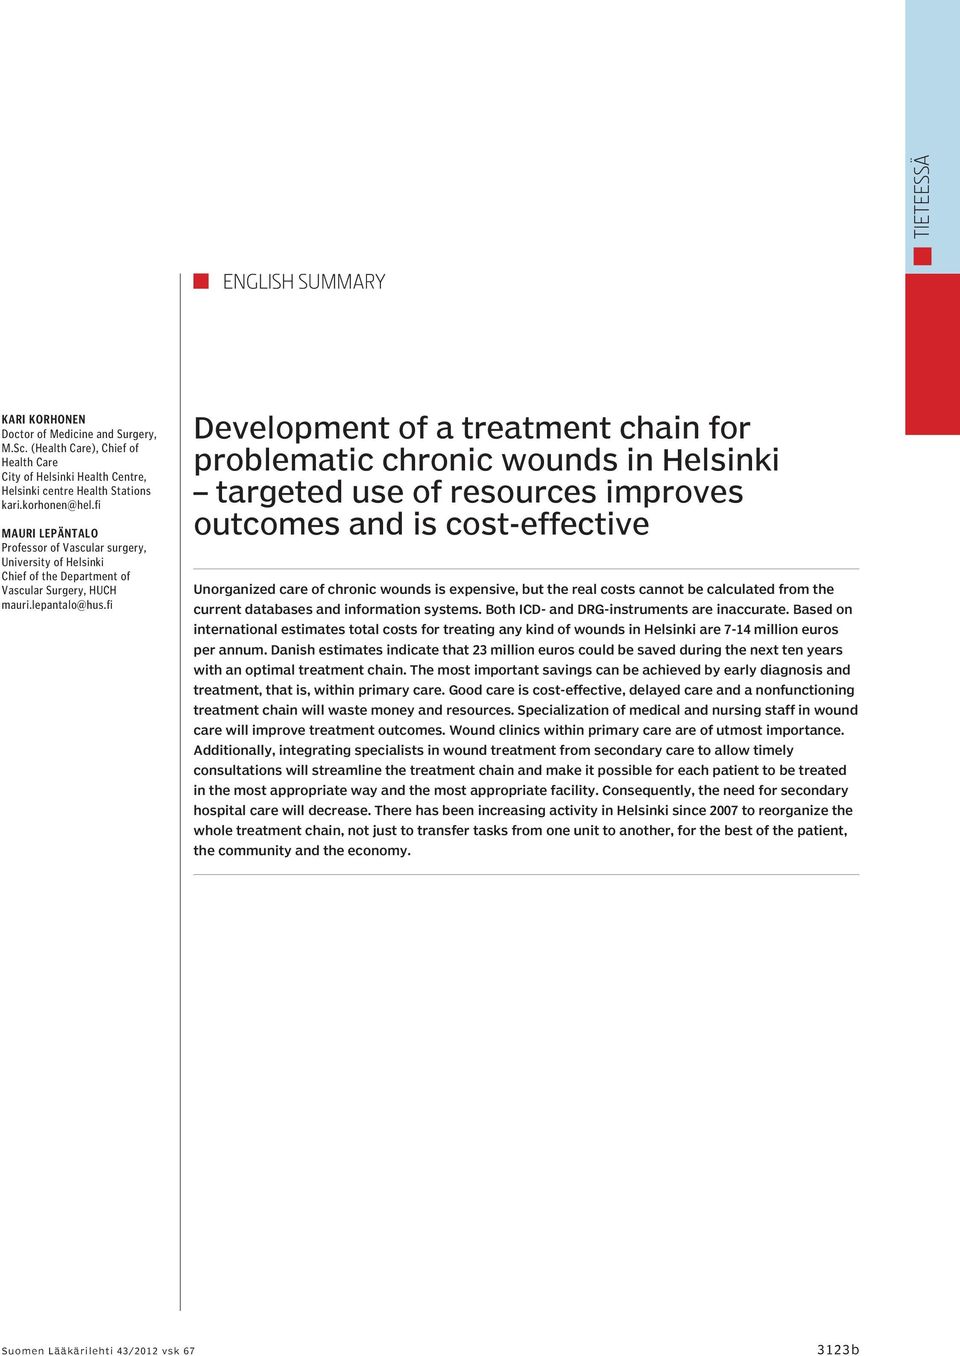 fi Development of a treatment chain for problematic chronic wounds in Helsinki targeted use of resources improves outcomes and is cost-effective Unorganized care of chronic wounds is expensive, but